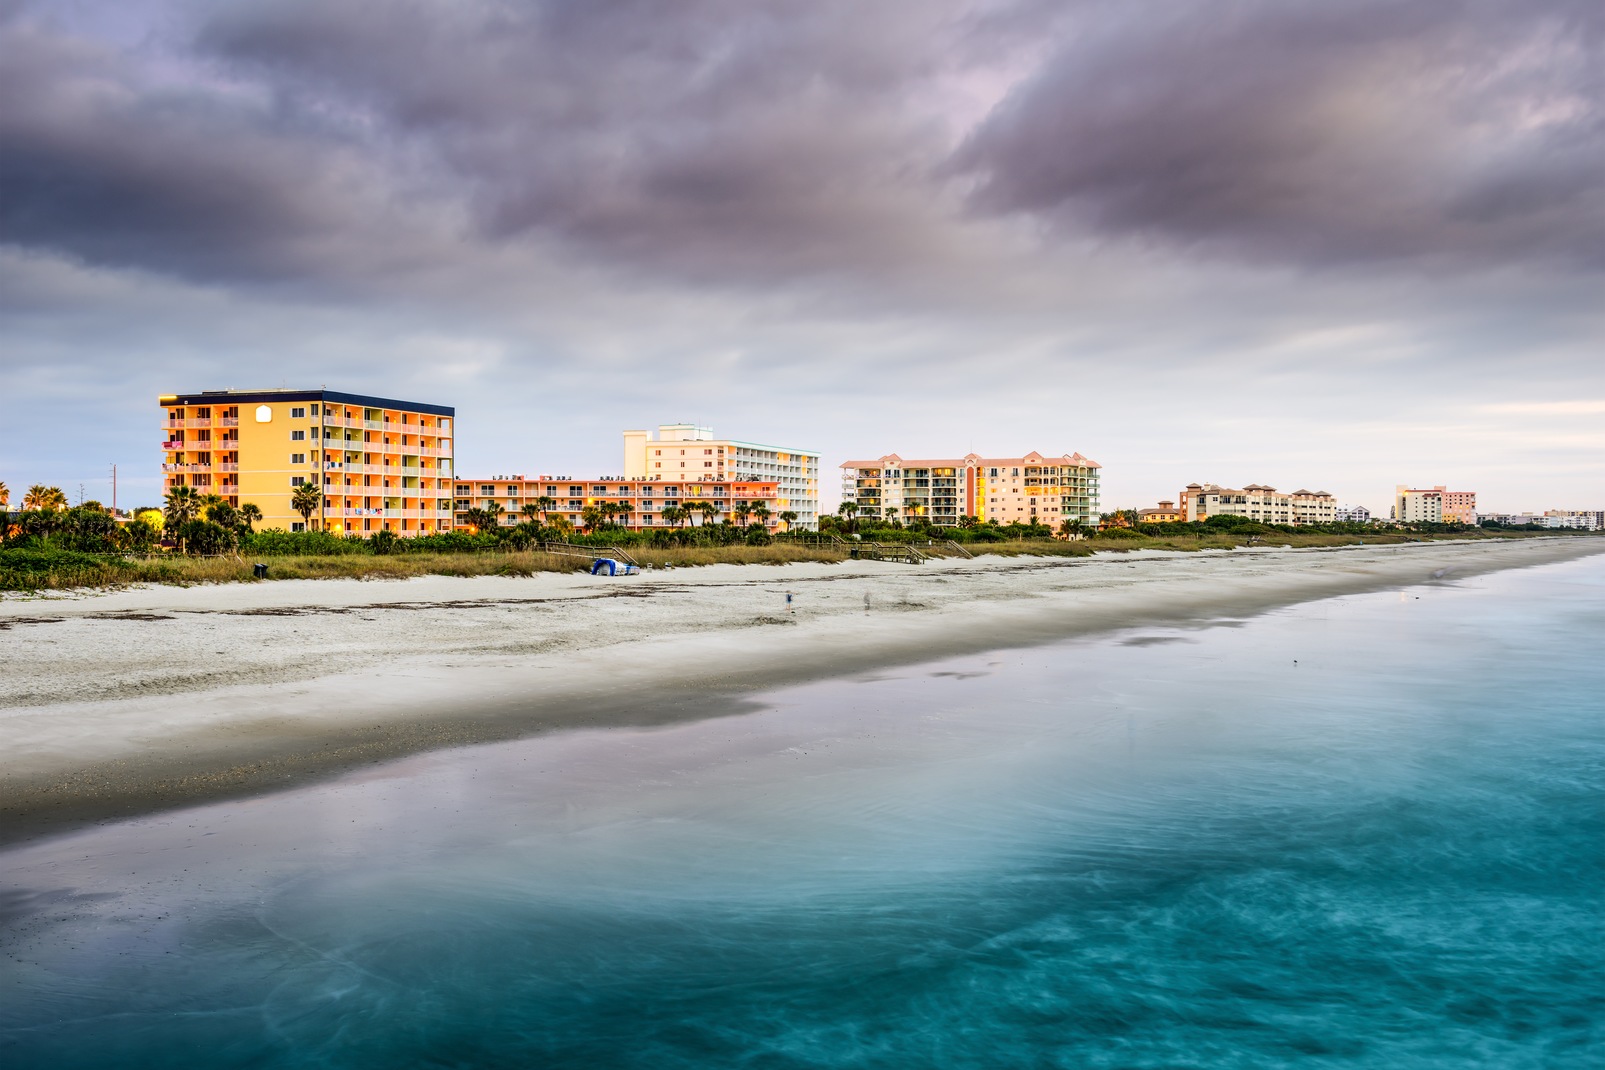 Holiday Attractions in Cocoa Beach